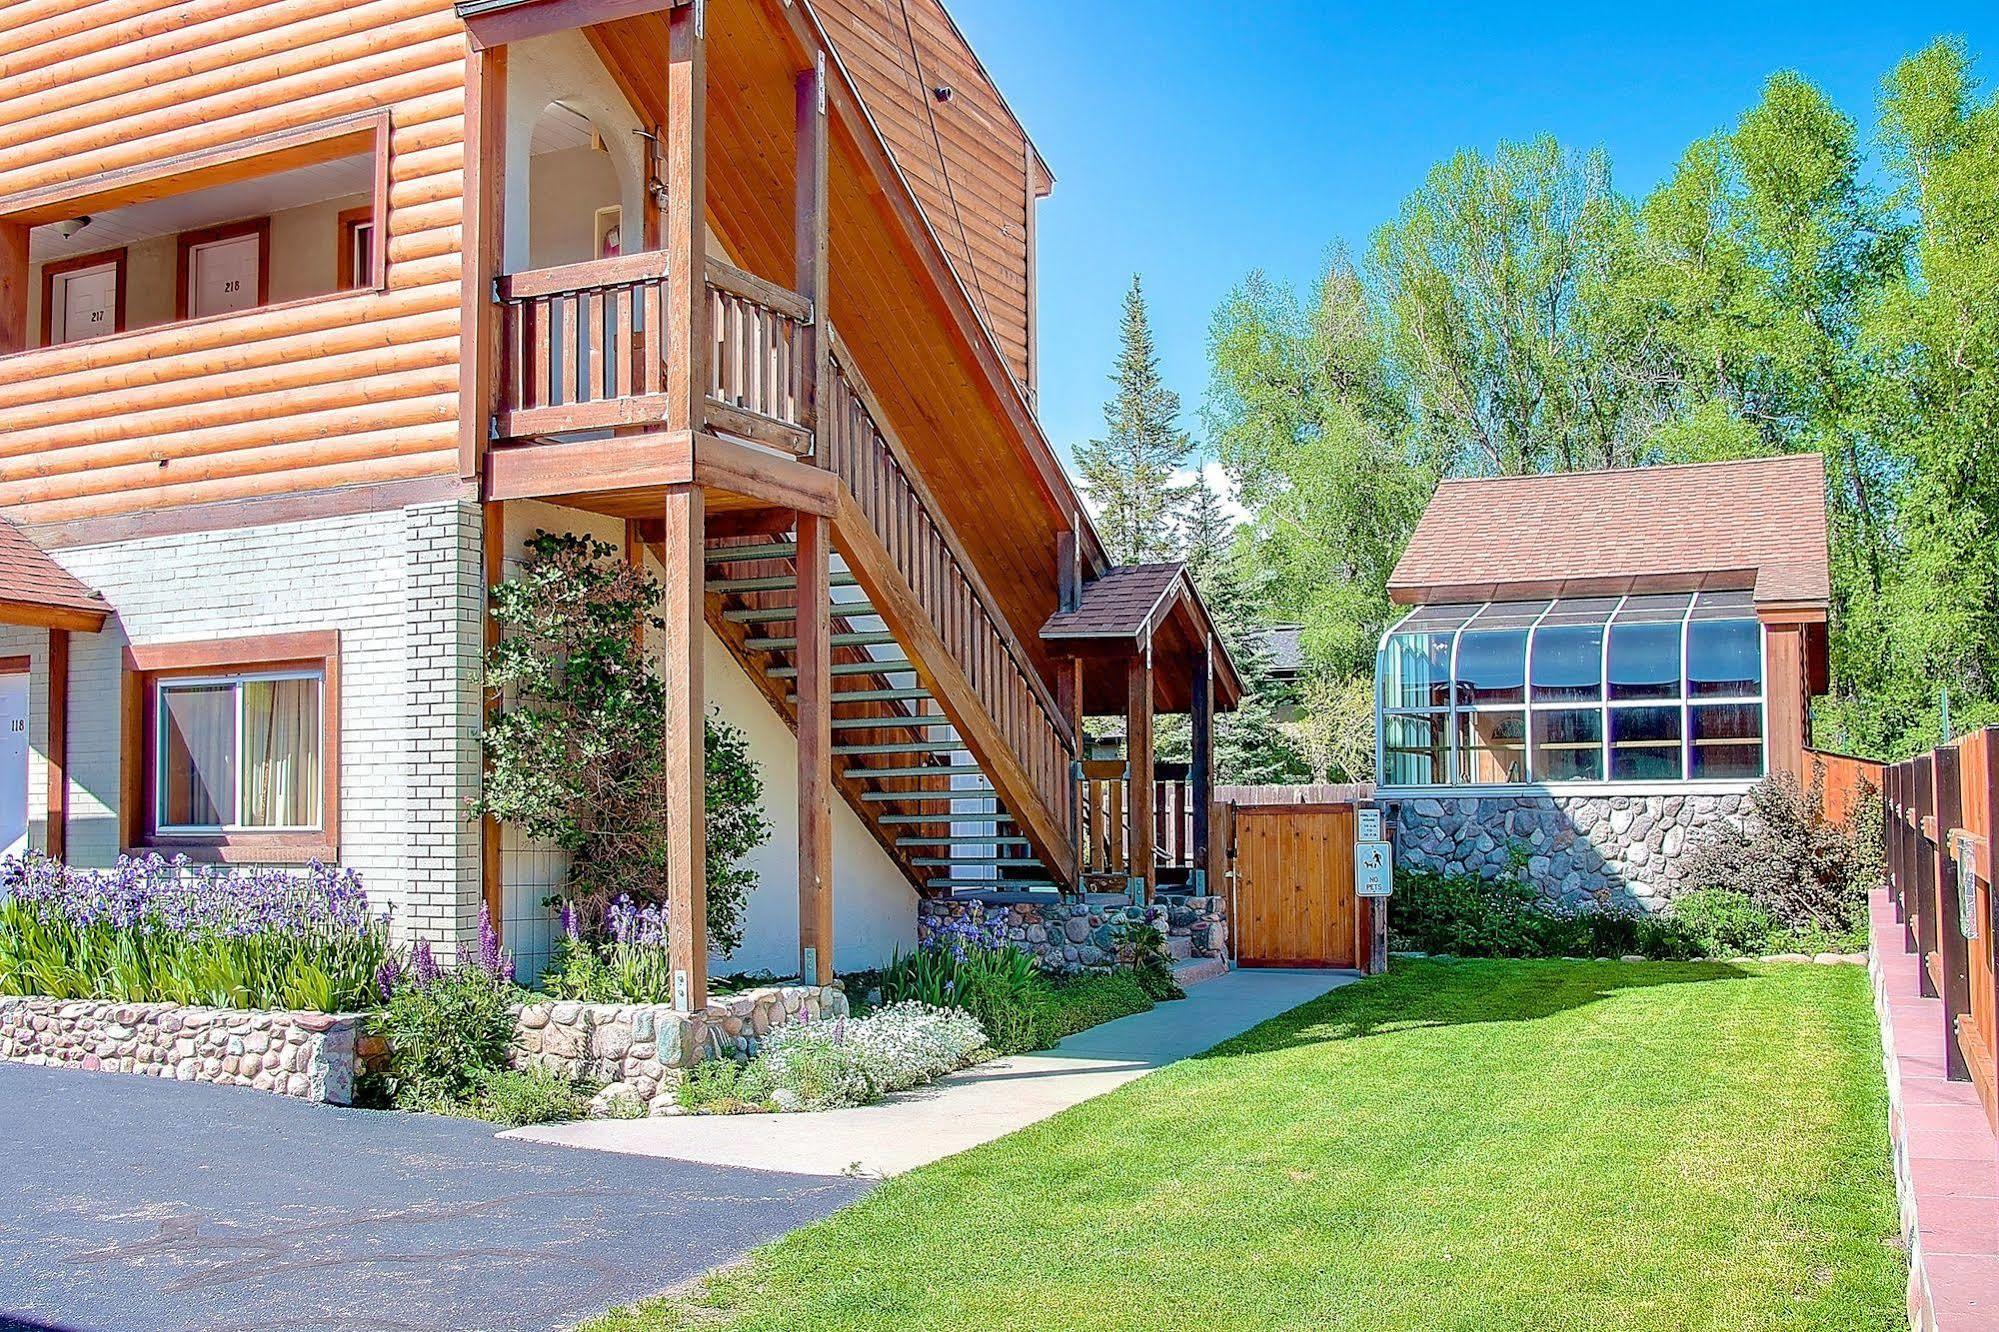 Nordic Lodge Steamboat Springs Exterior photo